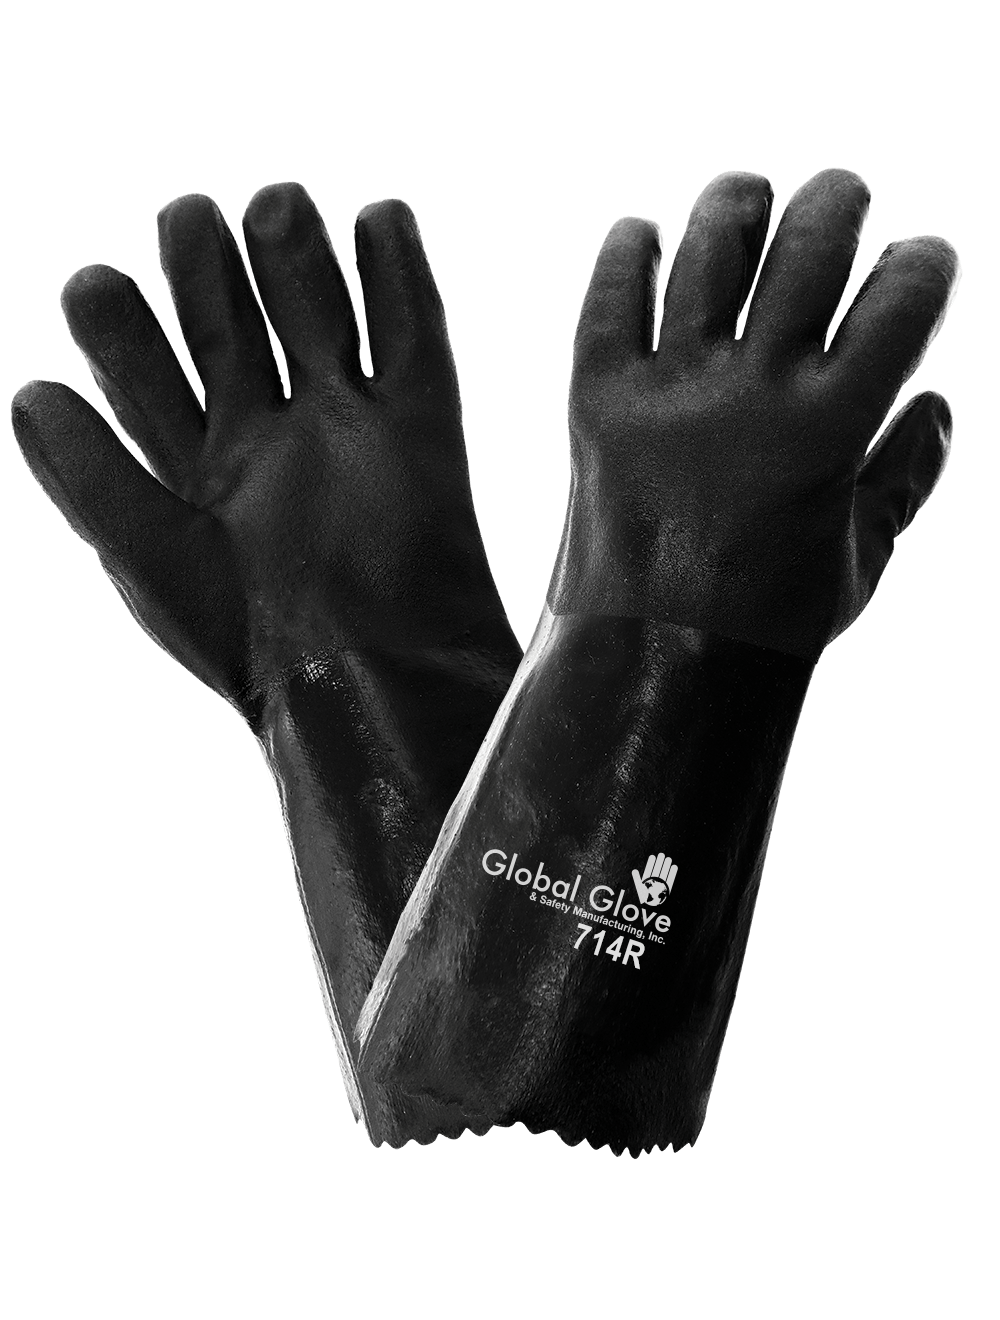 Jersey Lined Black PVC Chemical Handling Glove